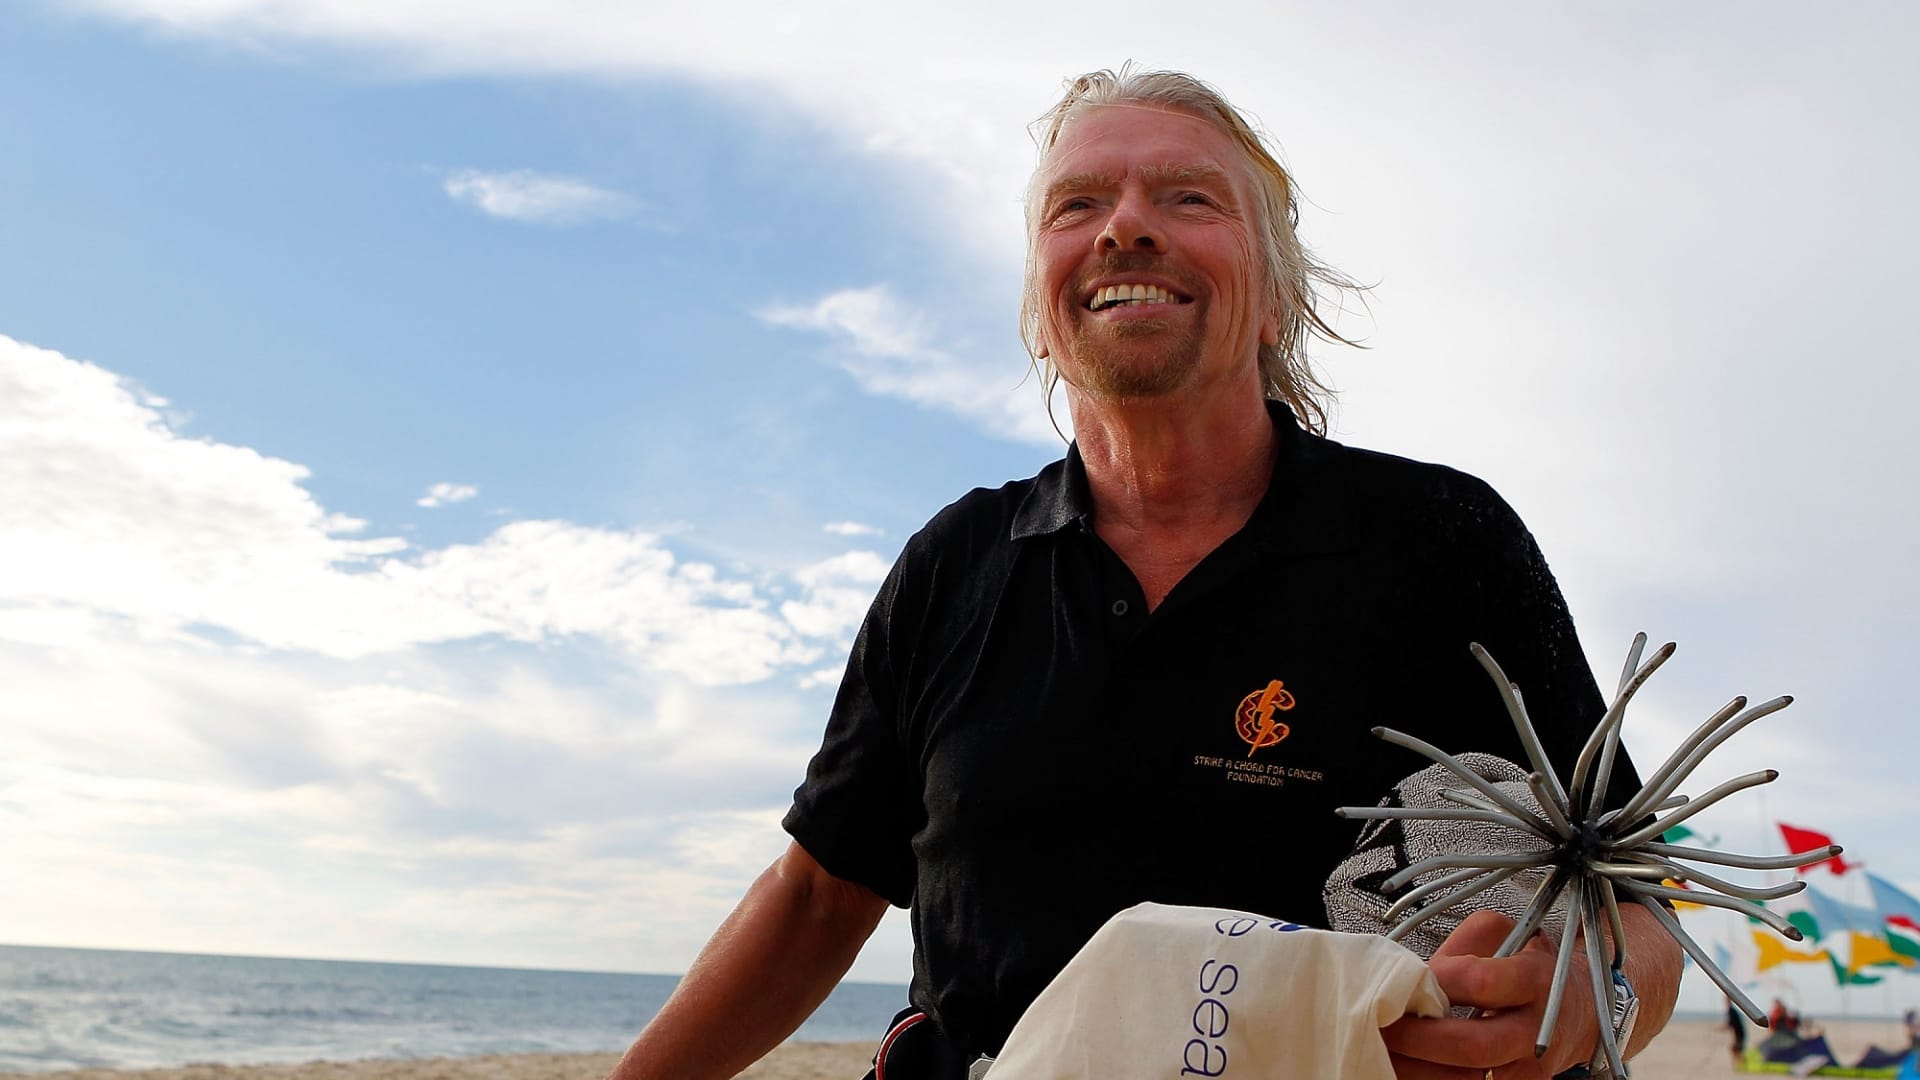 Richard Branson's top productivity trick is a simple habit that has nothing to do with email or to-do lists